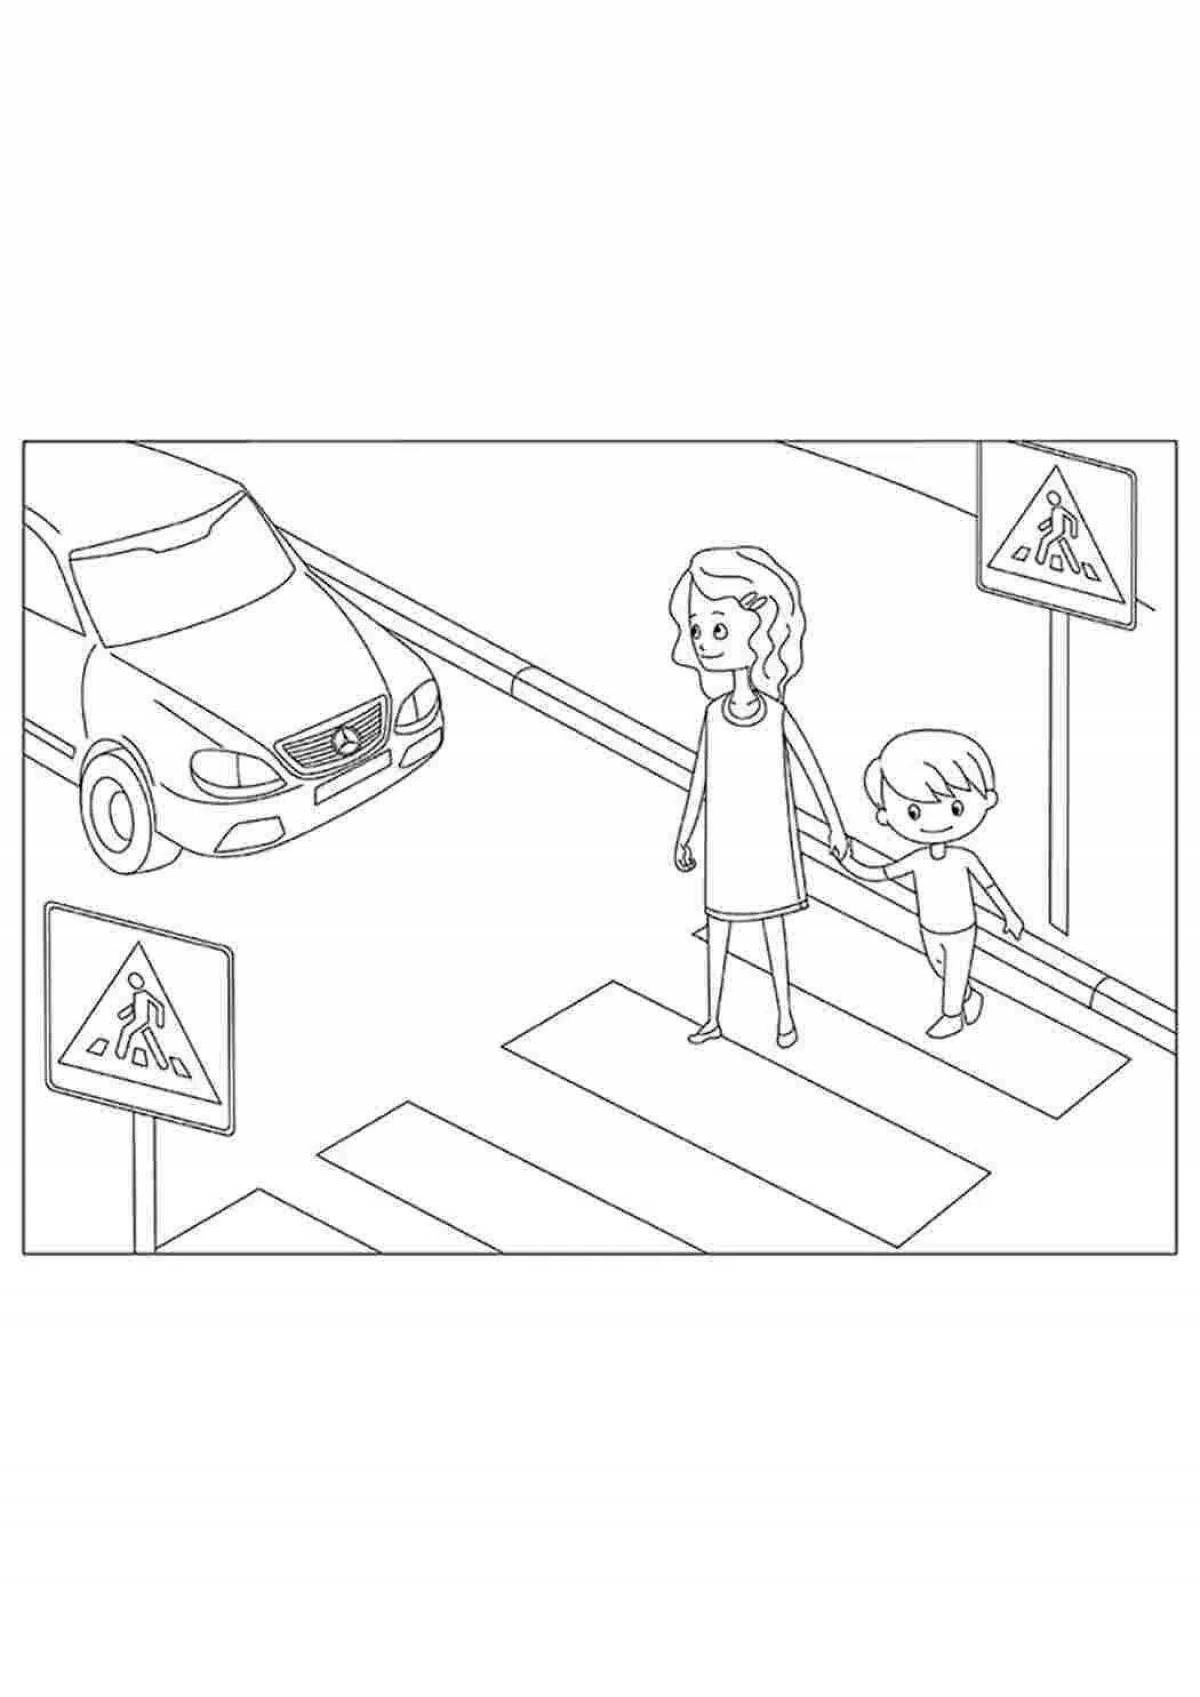 Traffic safety coloring page